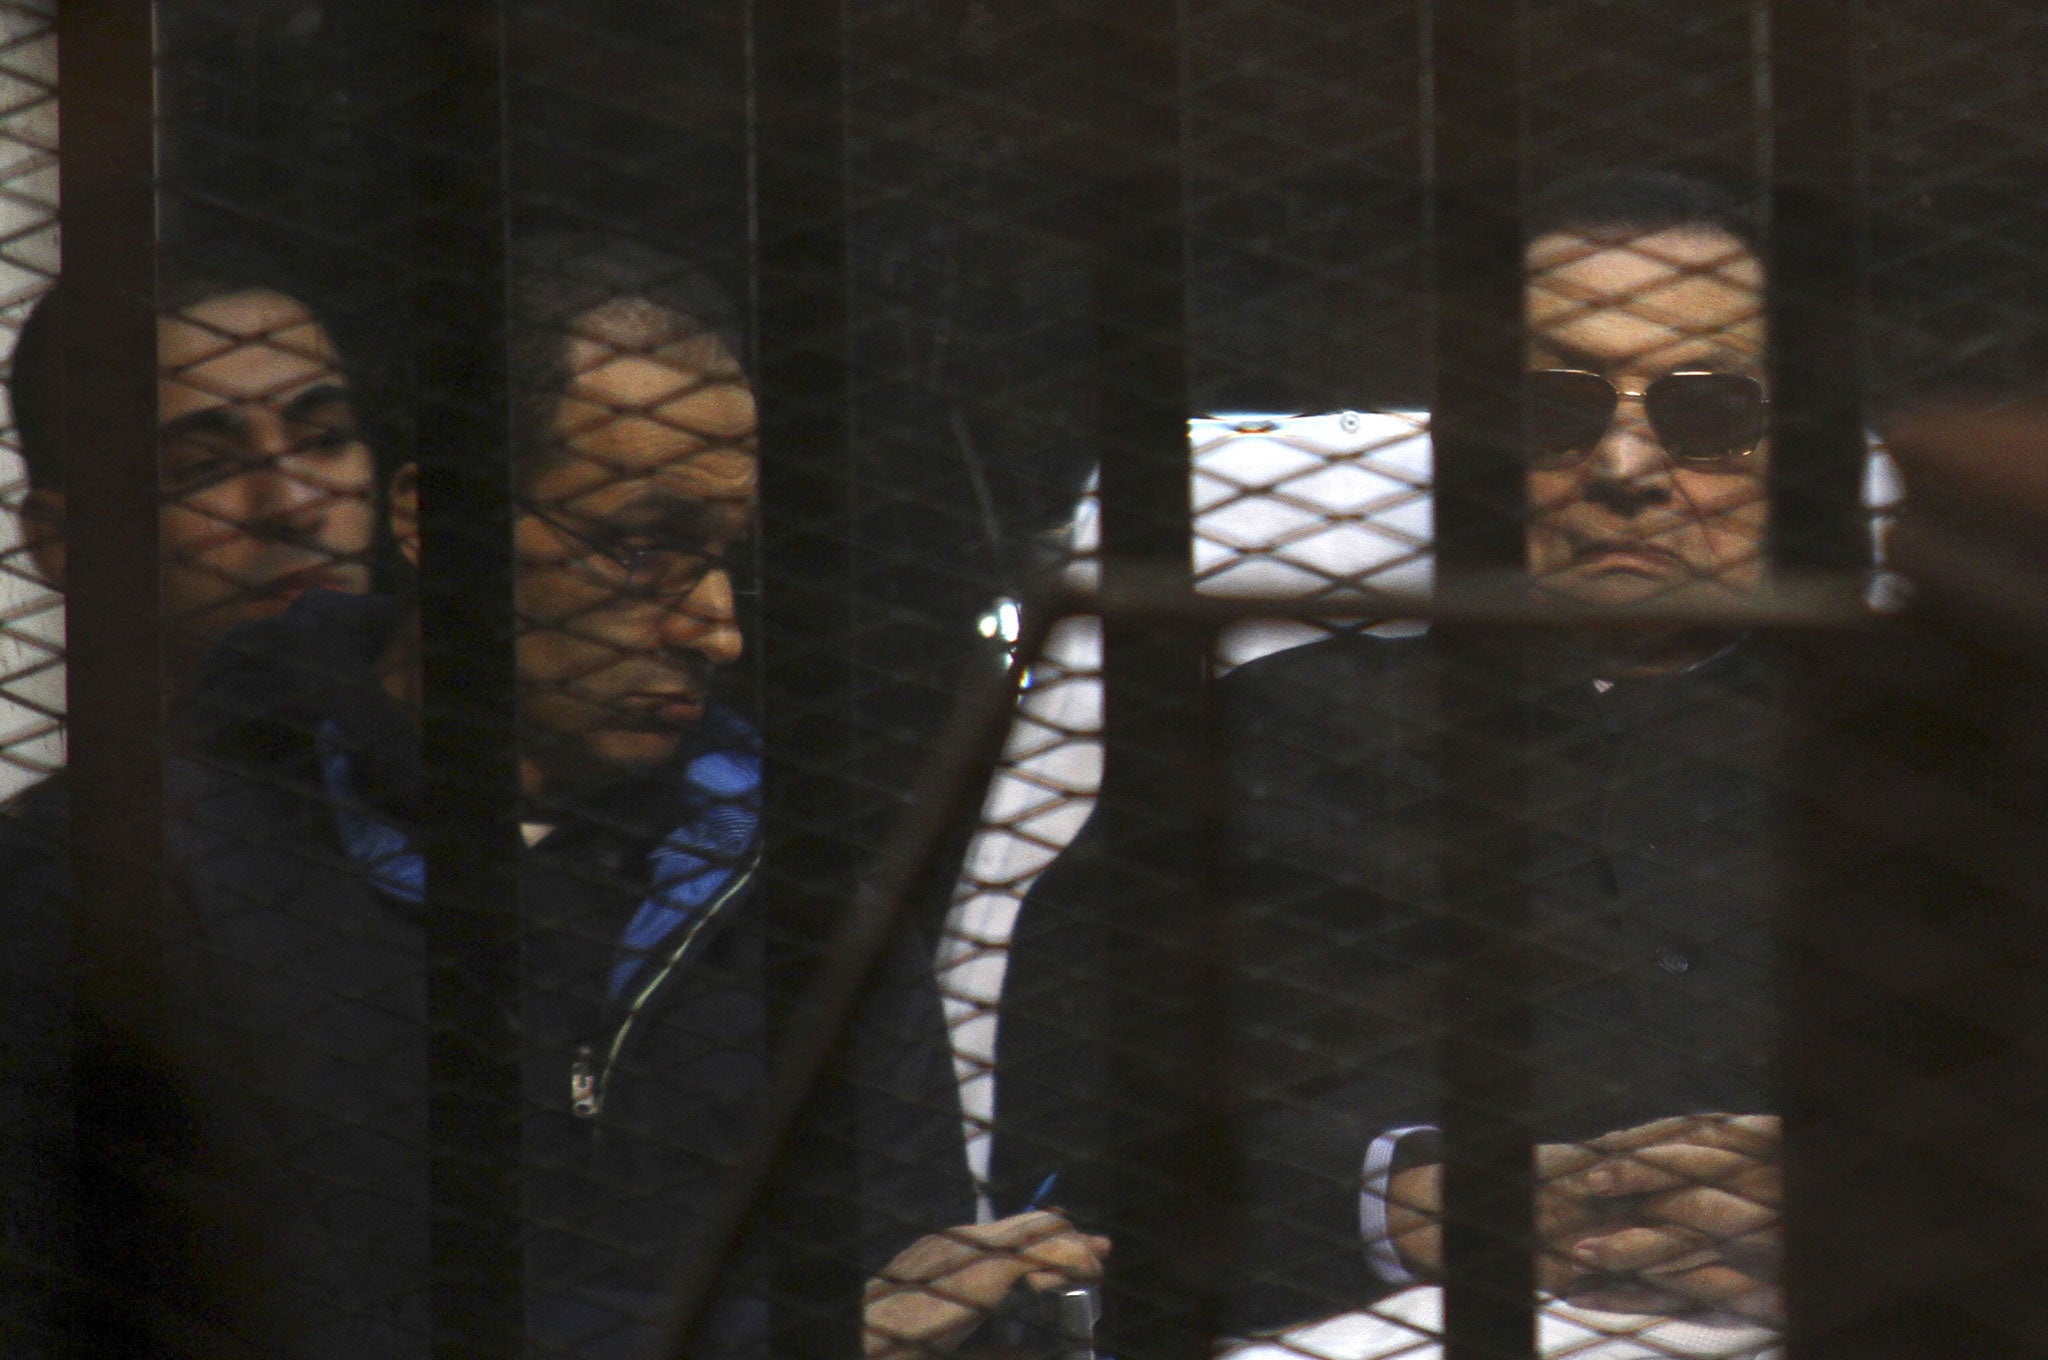 Ousted Egyptian President Hosni Mubarak, 86, lies on a gurney next to his son Gamal, second left, in the defendants cage during a court hearing in Cairo, Egypt